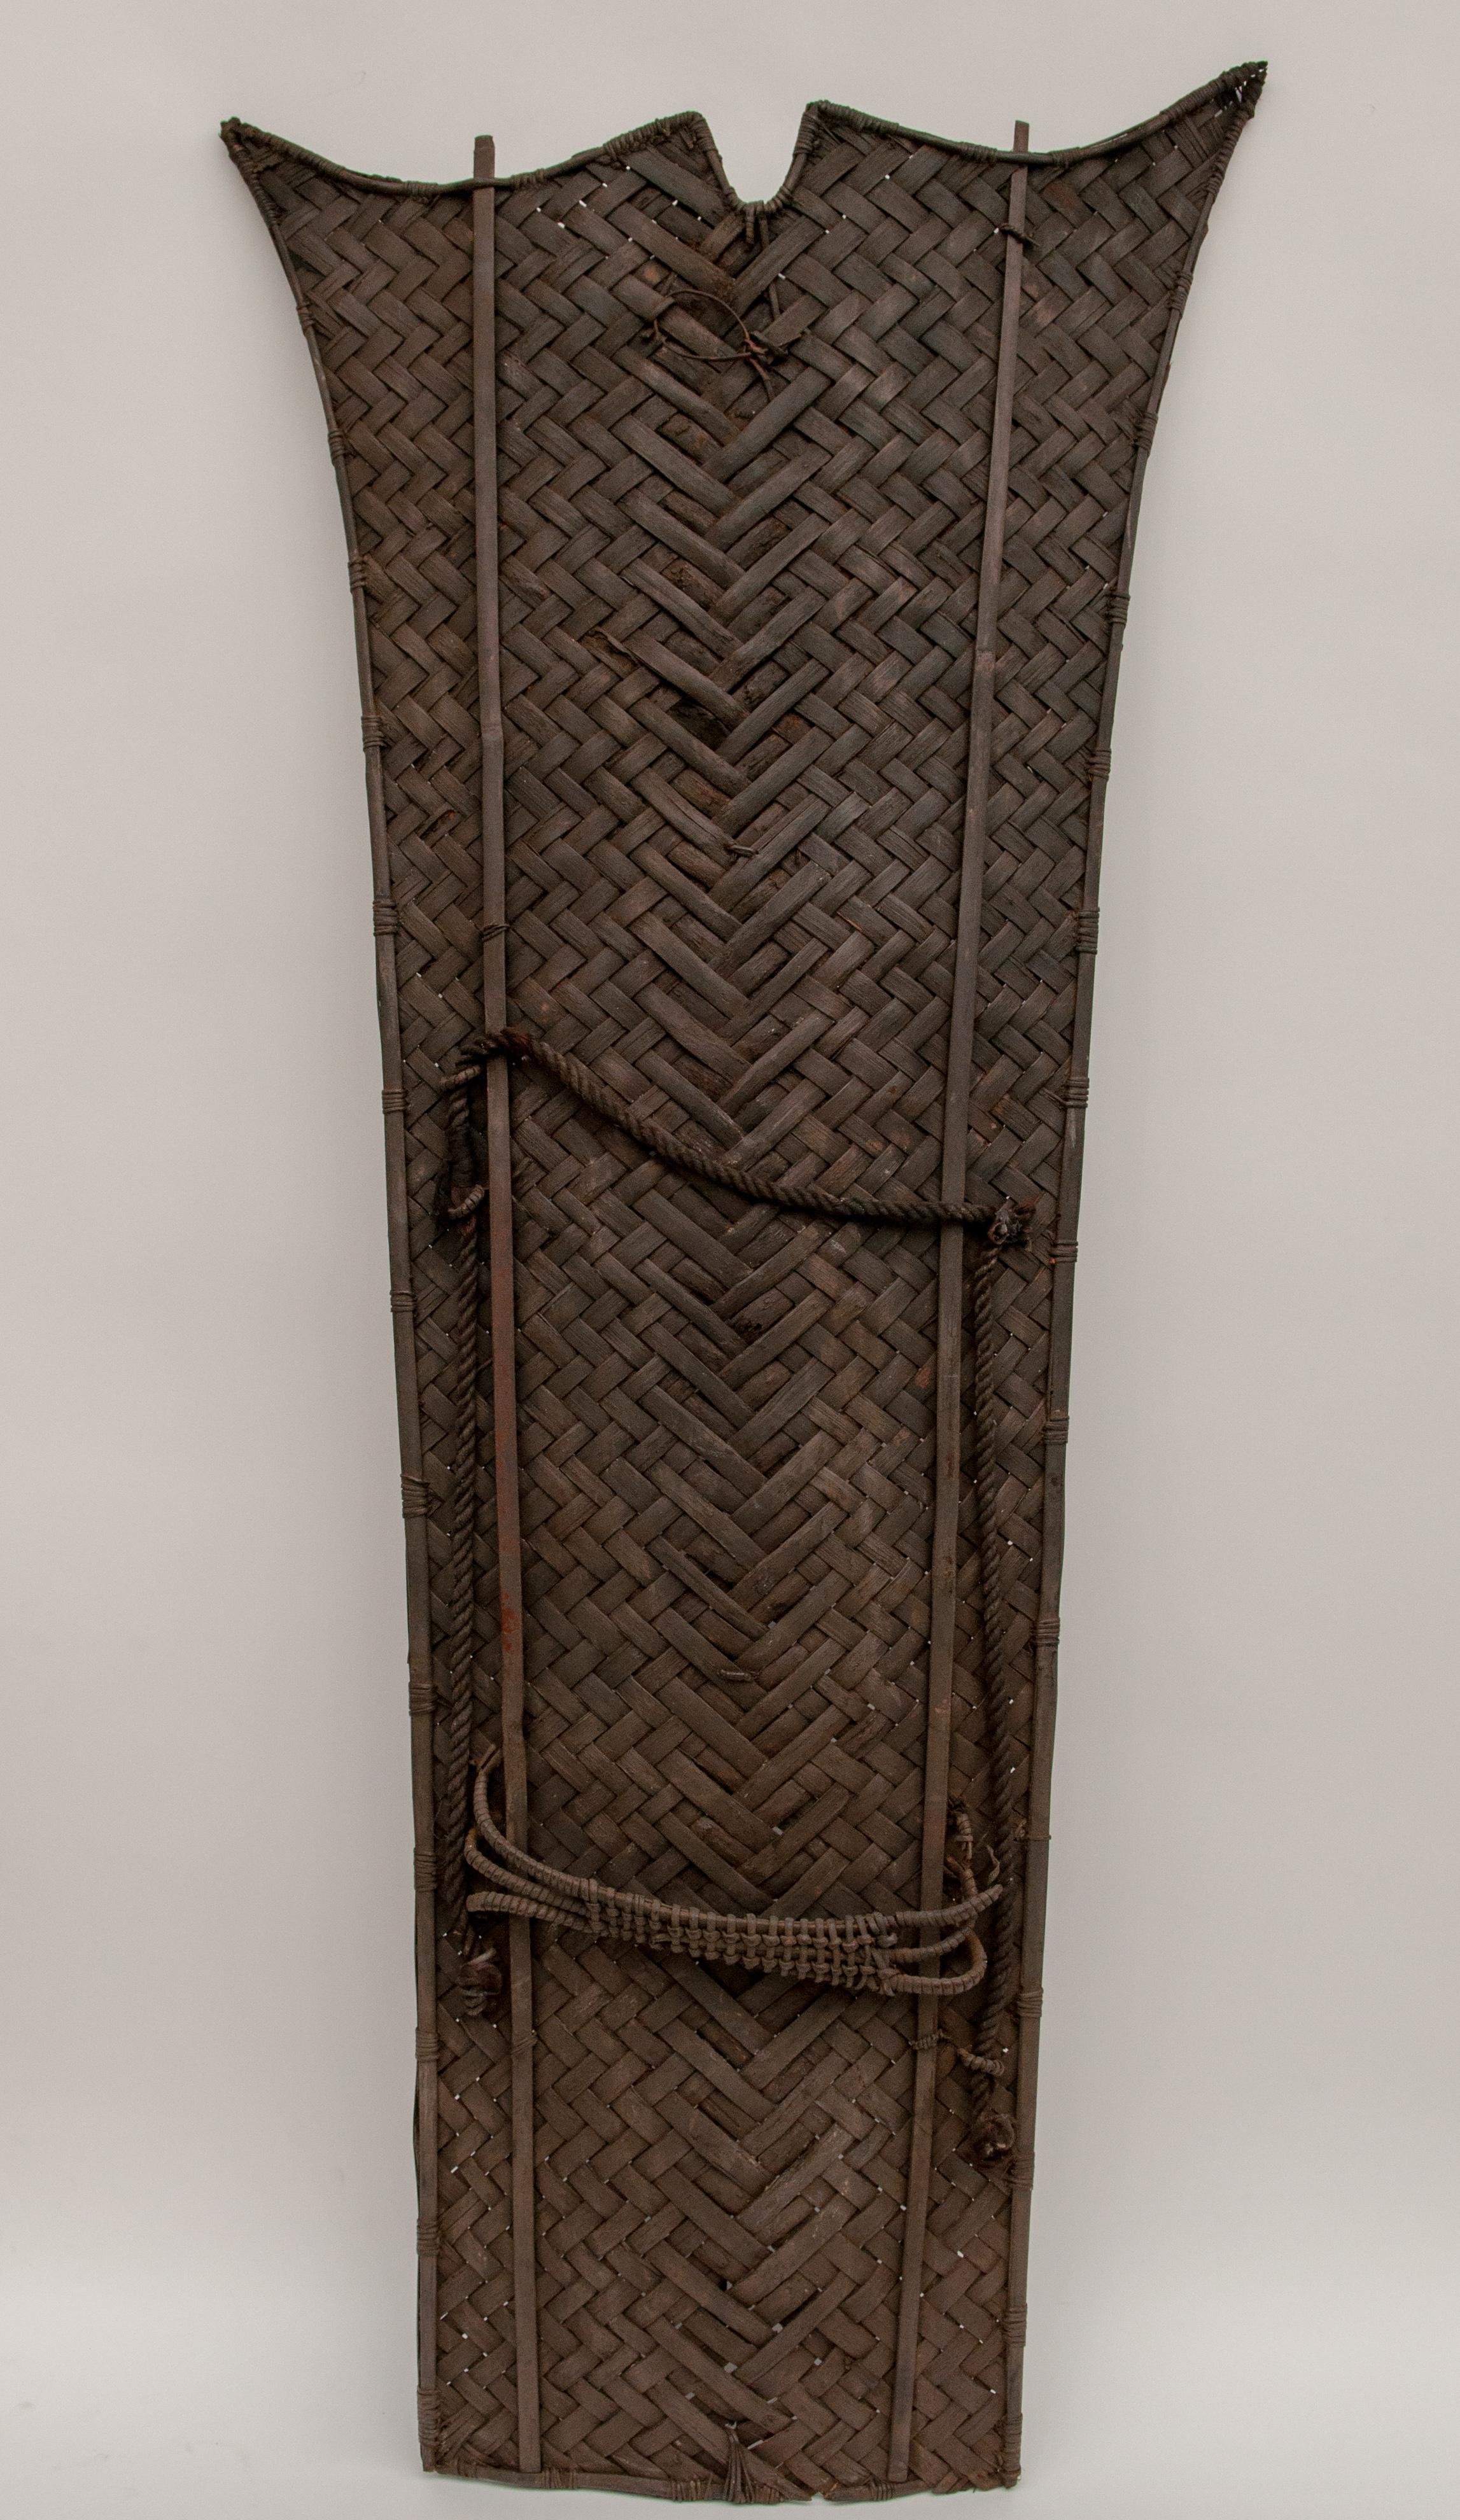 Vintage Tribal Shield of Cane & Bamboo. From Nagaland, Northeast India. Mid-20th Century.
Offered by Bruce Hughes.
This shield was most likely for ceremonial use, possibly in the playing out of mock battles between village clans. The rising corners